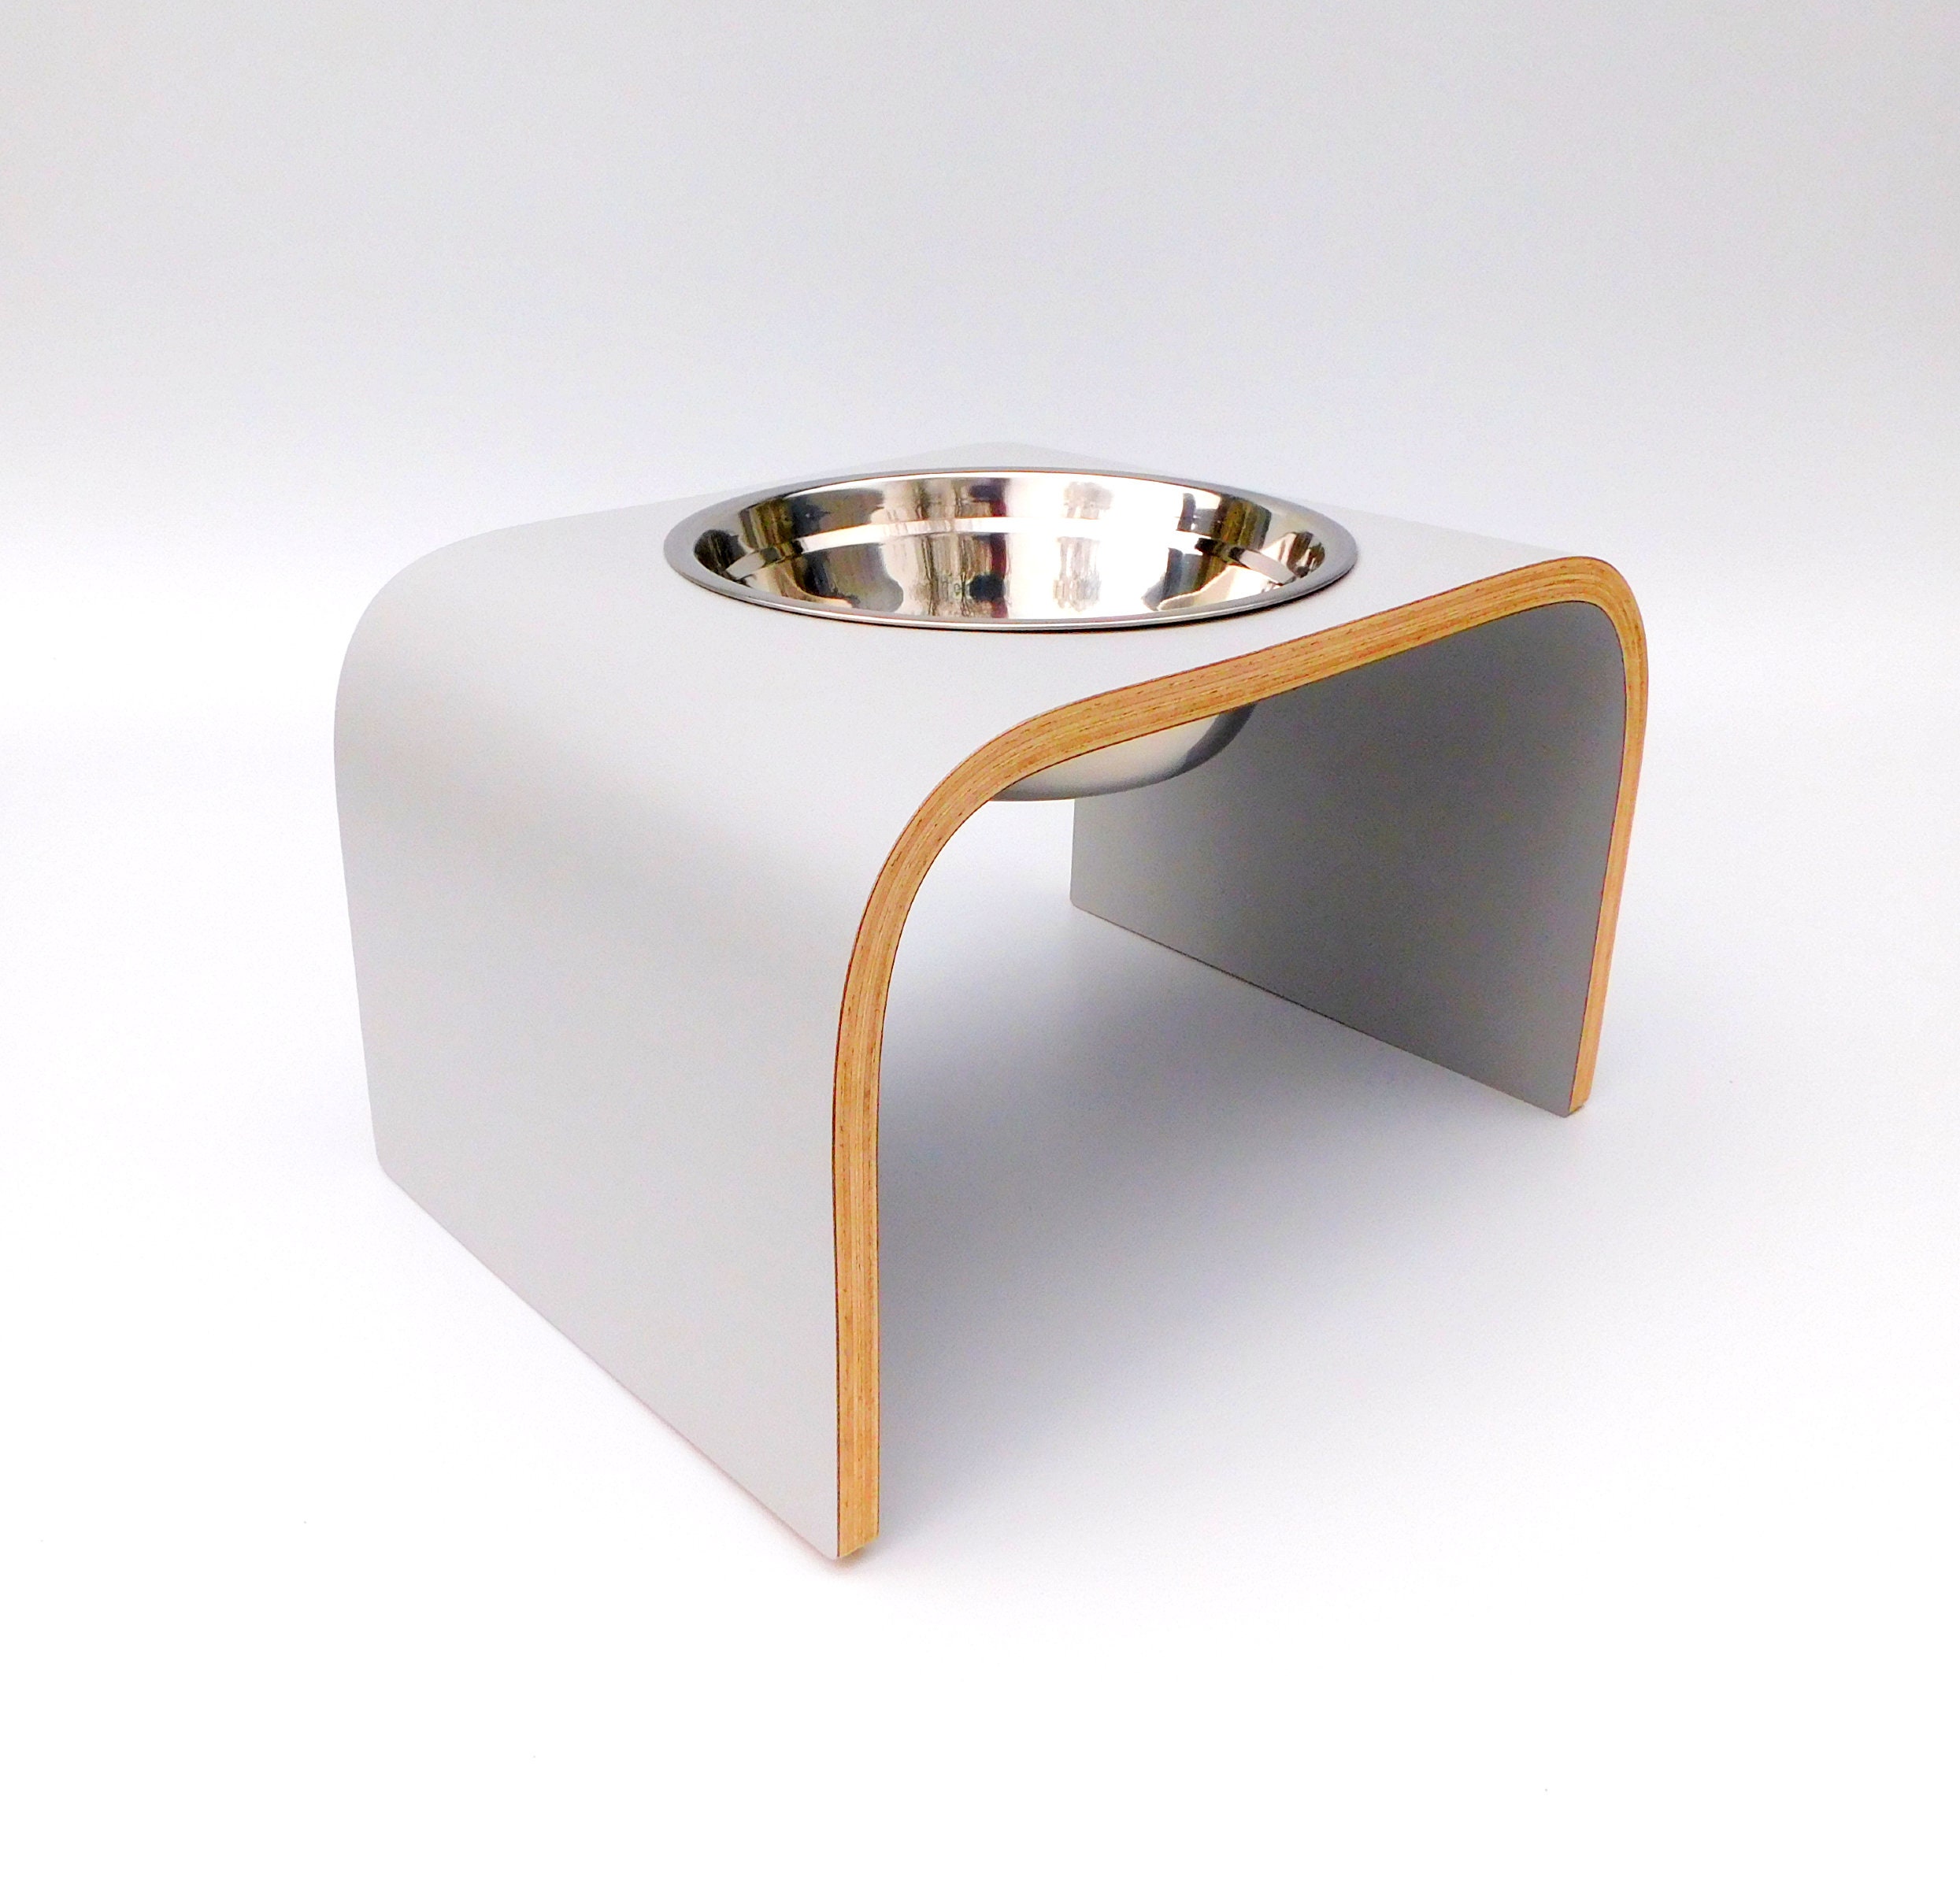 The Carmichael Workshop: Raised Dog Food and Water Bowl Stand